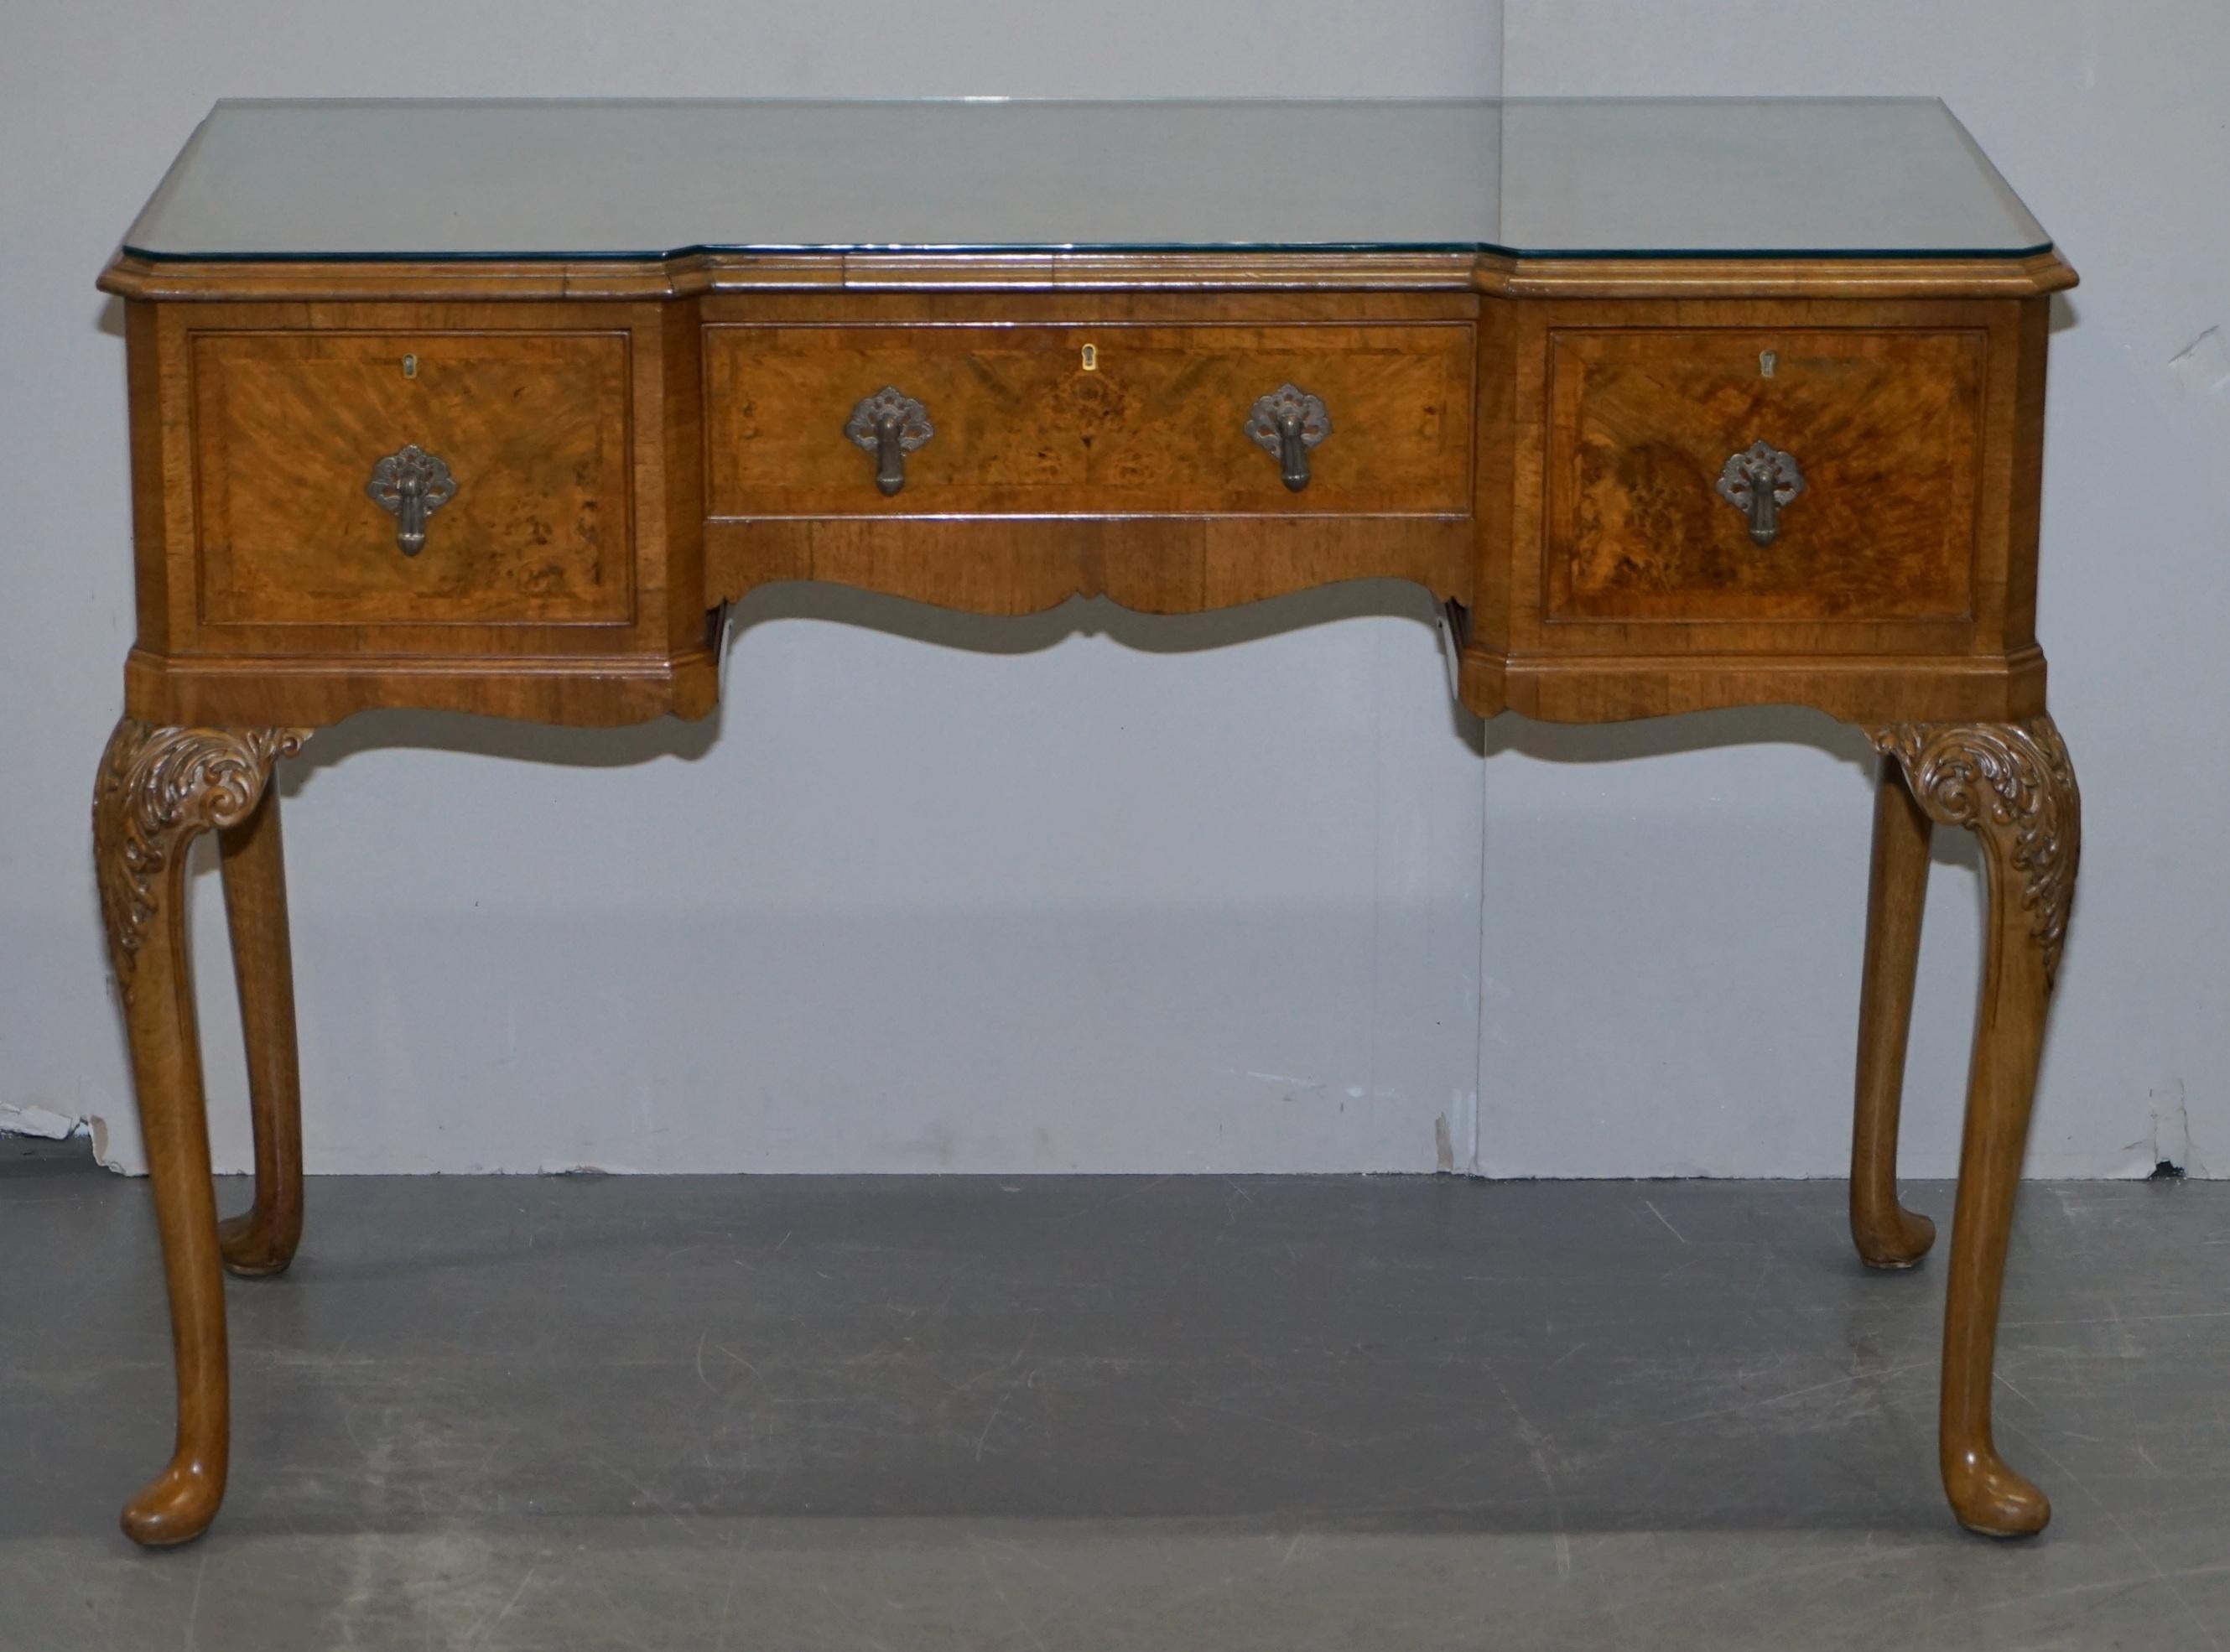 We are delighted to offer this stunning Denby & Spinks Leeds circa 1920 Art Deco burr walnut inverted breakfront console table or sideboard which is part of a large dining suite

This piece is part of a complete dining suite as mentioned, in total